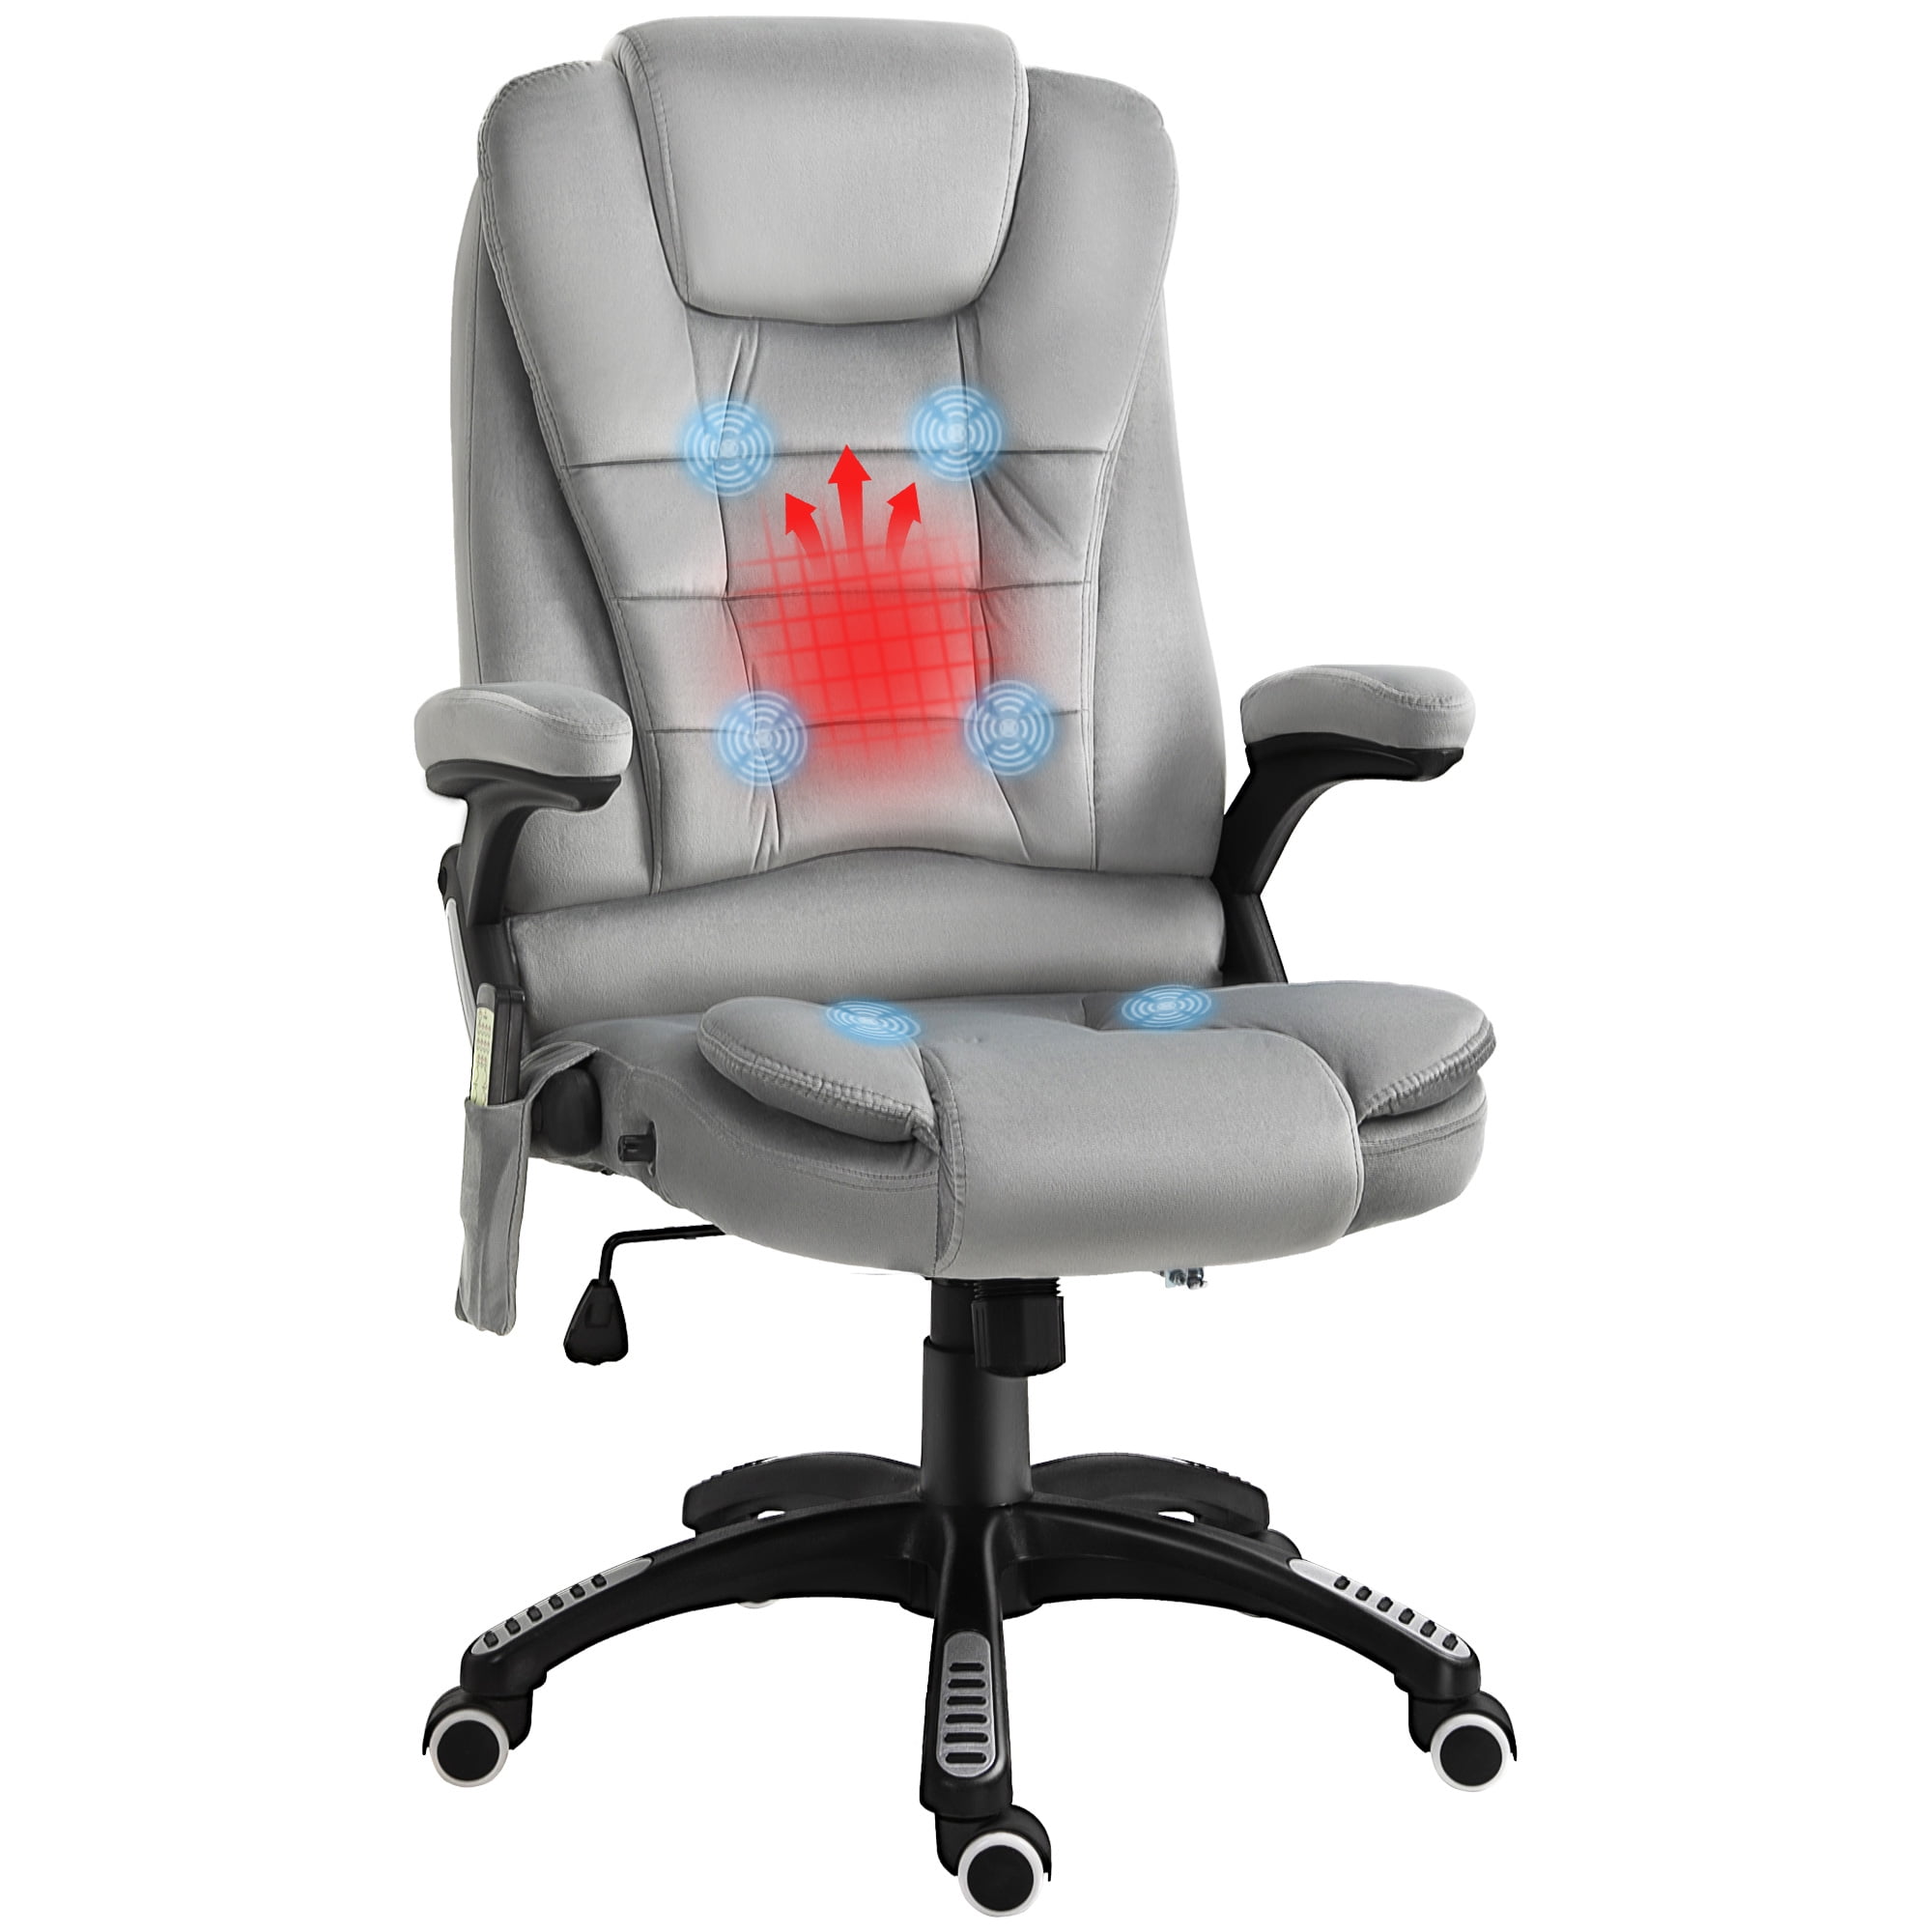 Office Chair for Sciatica  Relax The Back South Bay/Walnut Creek